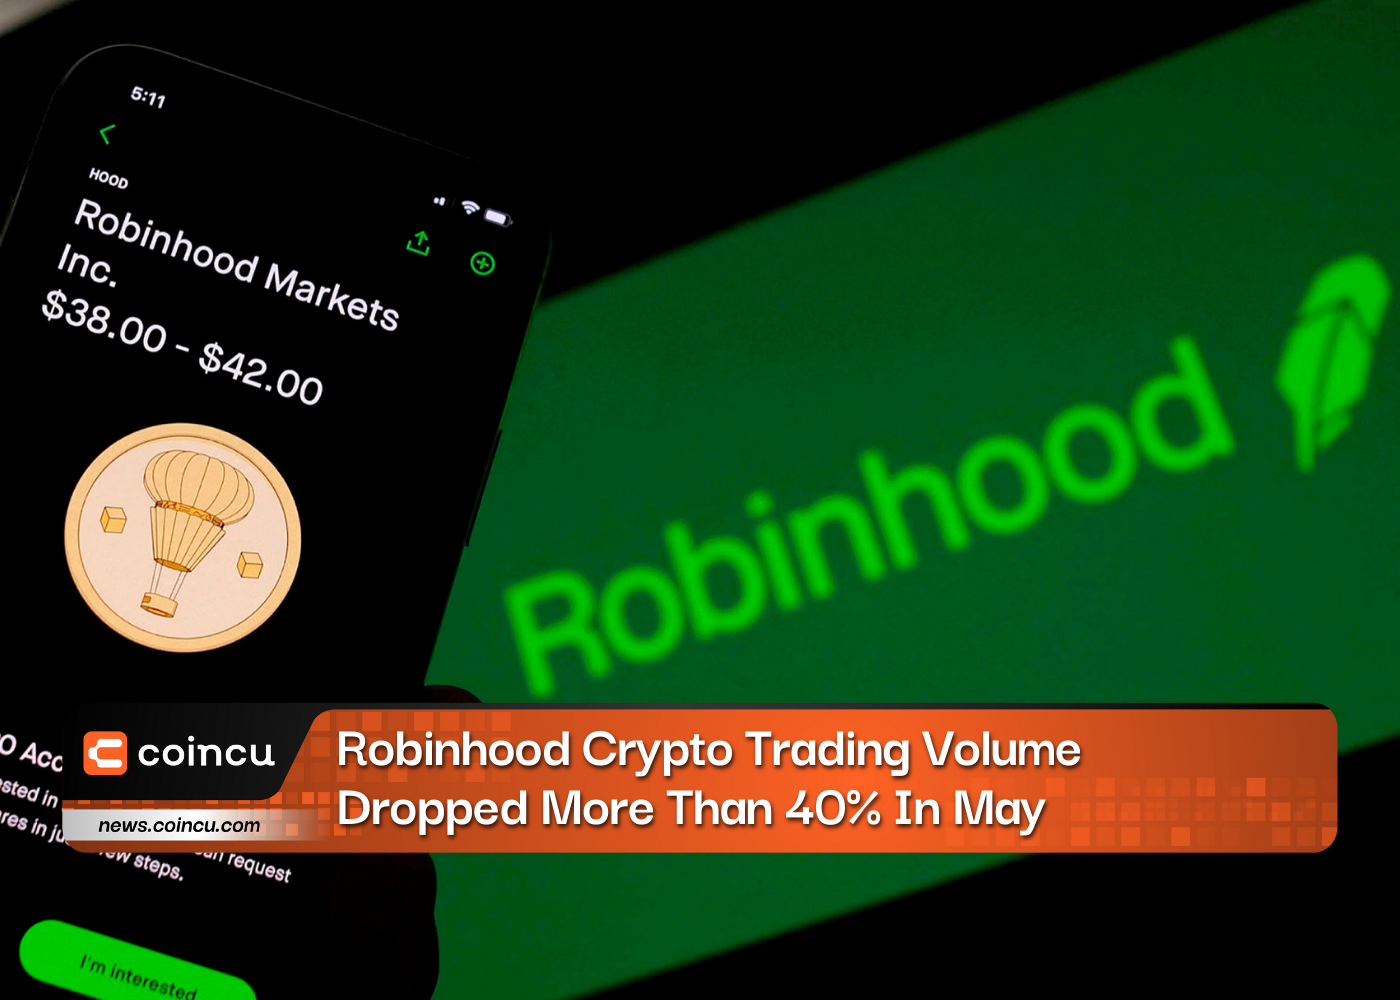 Robinhood Crypto Trading Volume Dropped More Than 40% In May